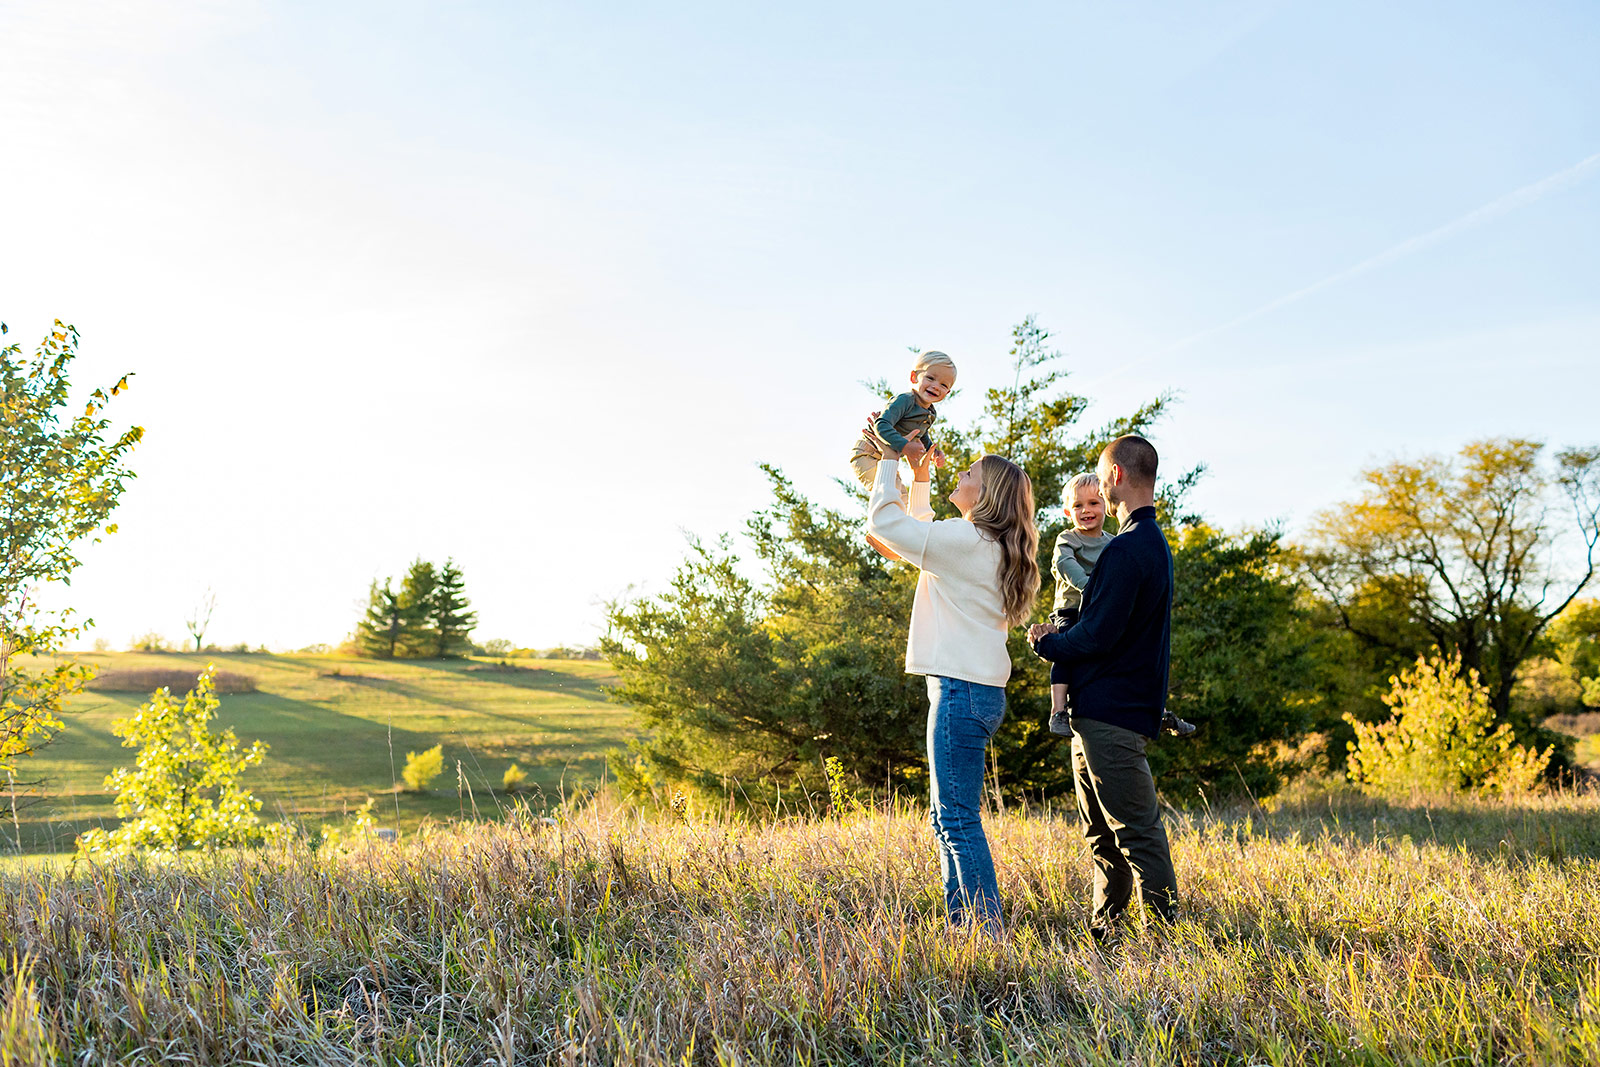 Becca holds Titus in the air as the family poses in front of beautiful rolling hills.